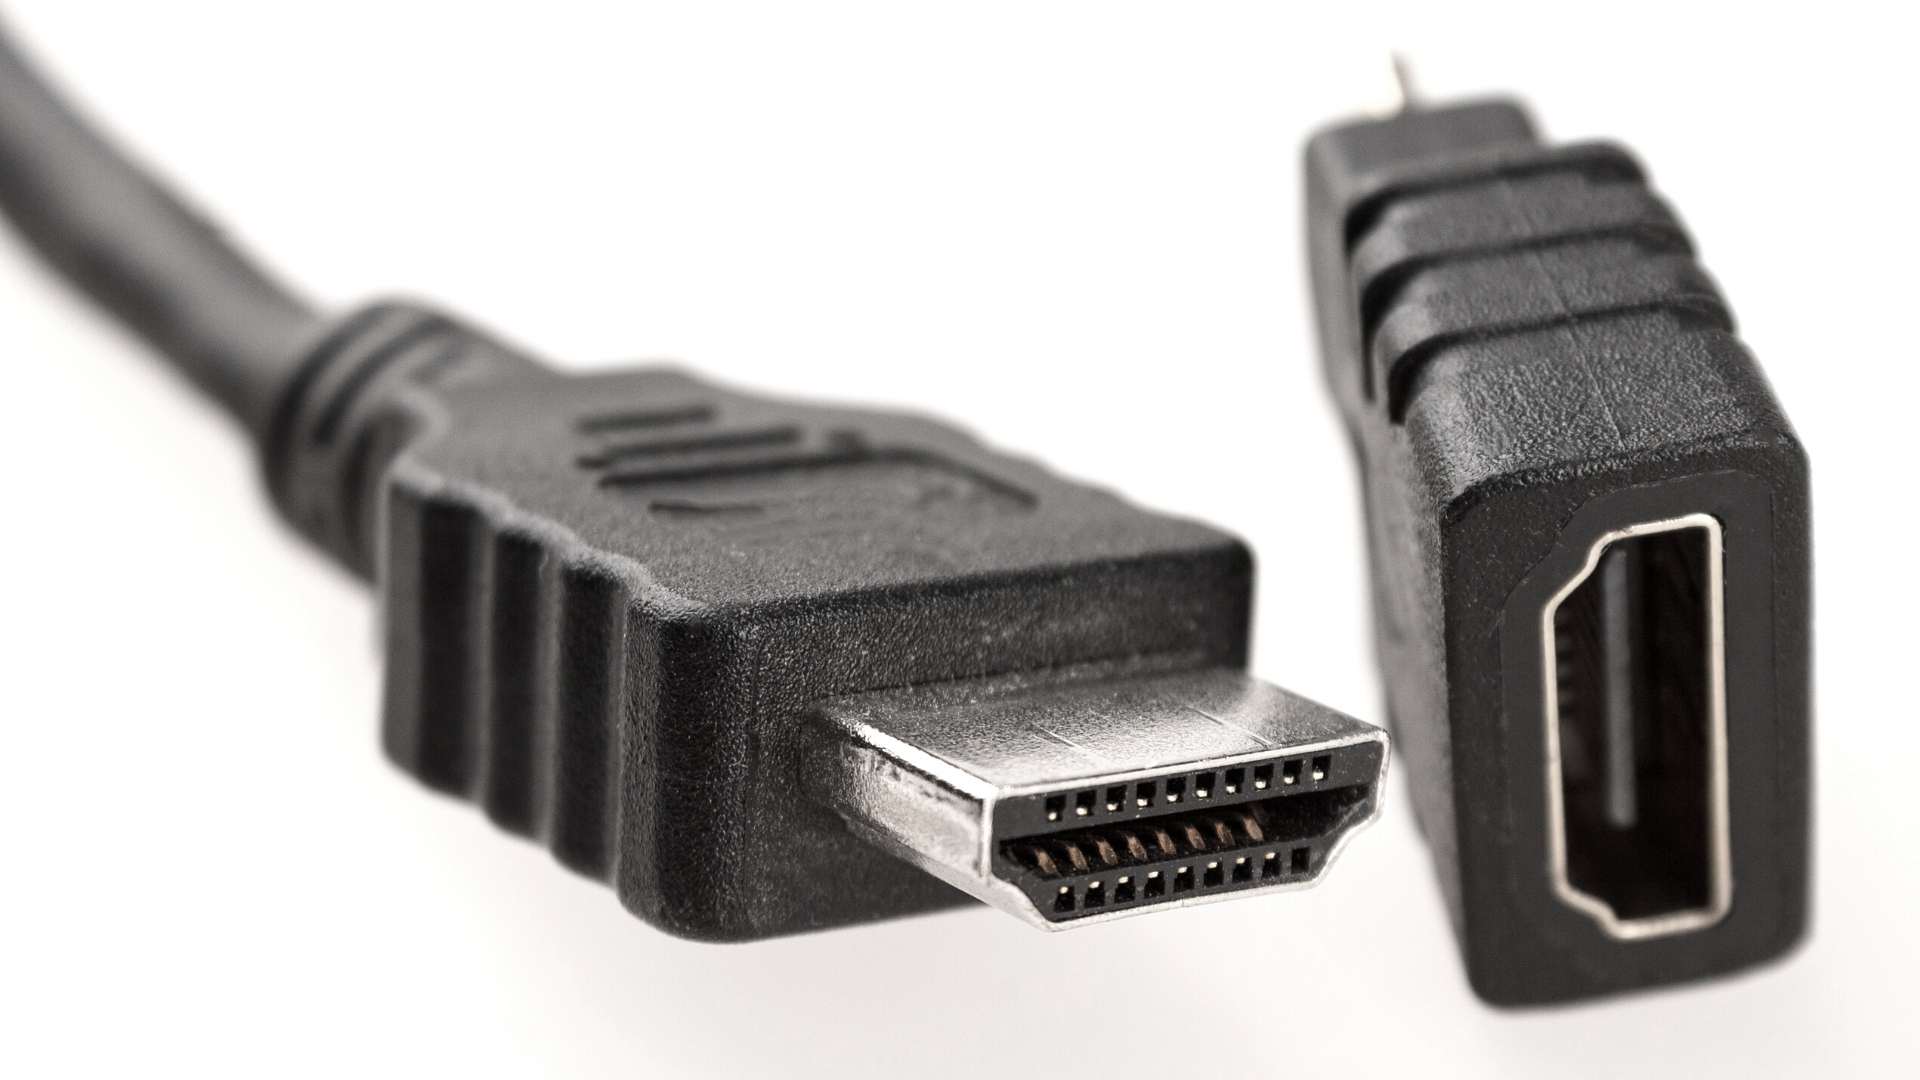 DisplayPort — Which One Should You Use?